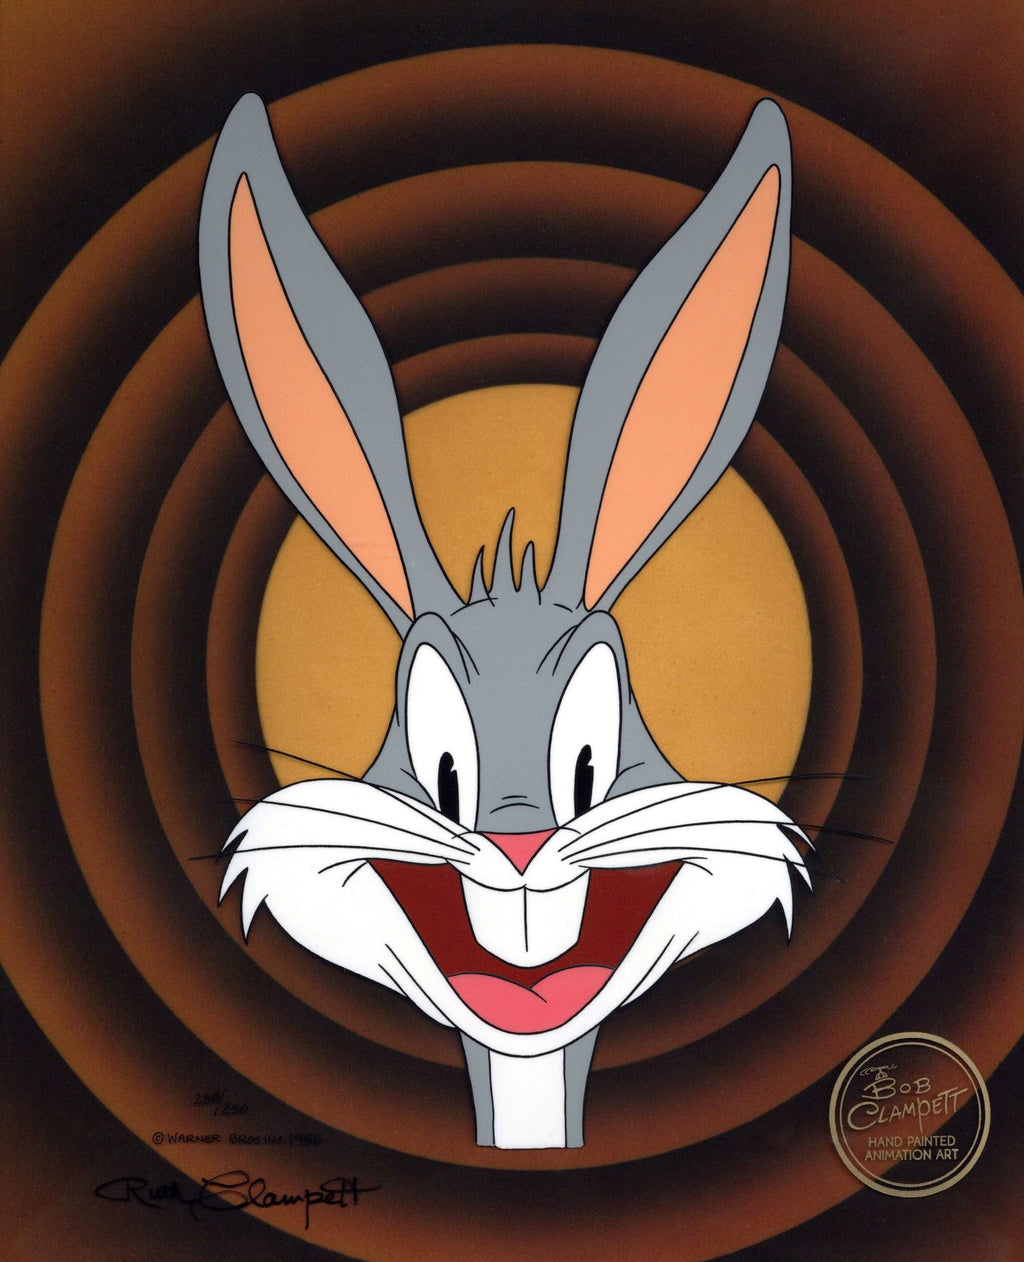 Last of its Edition Original Production Cel signed by Ruth Clampett: Bugs Bunny - Choice Fine Art